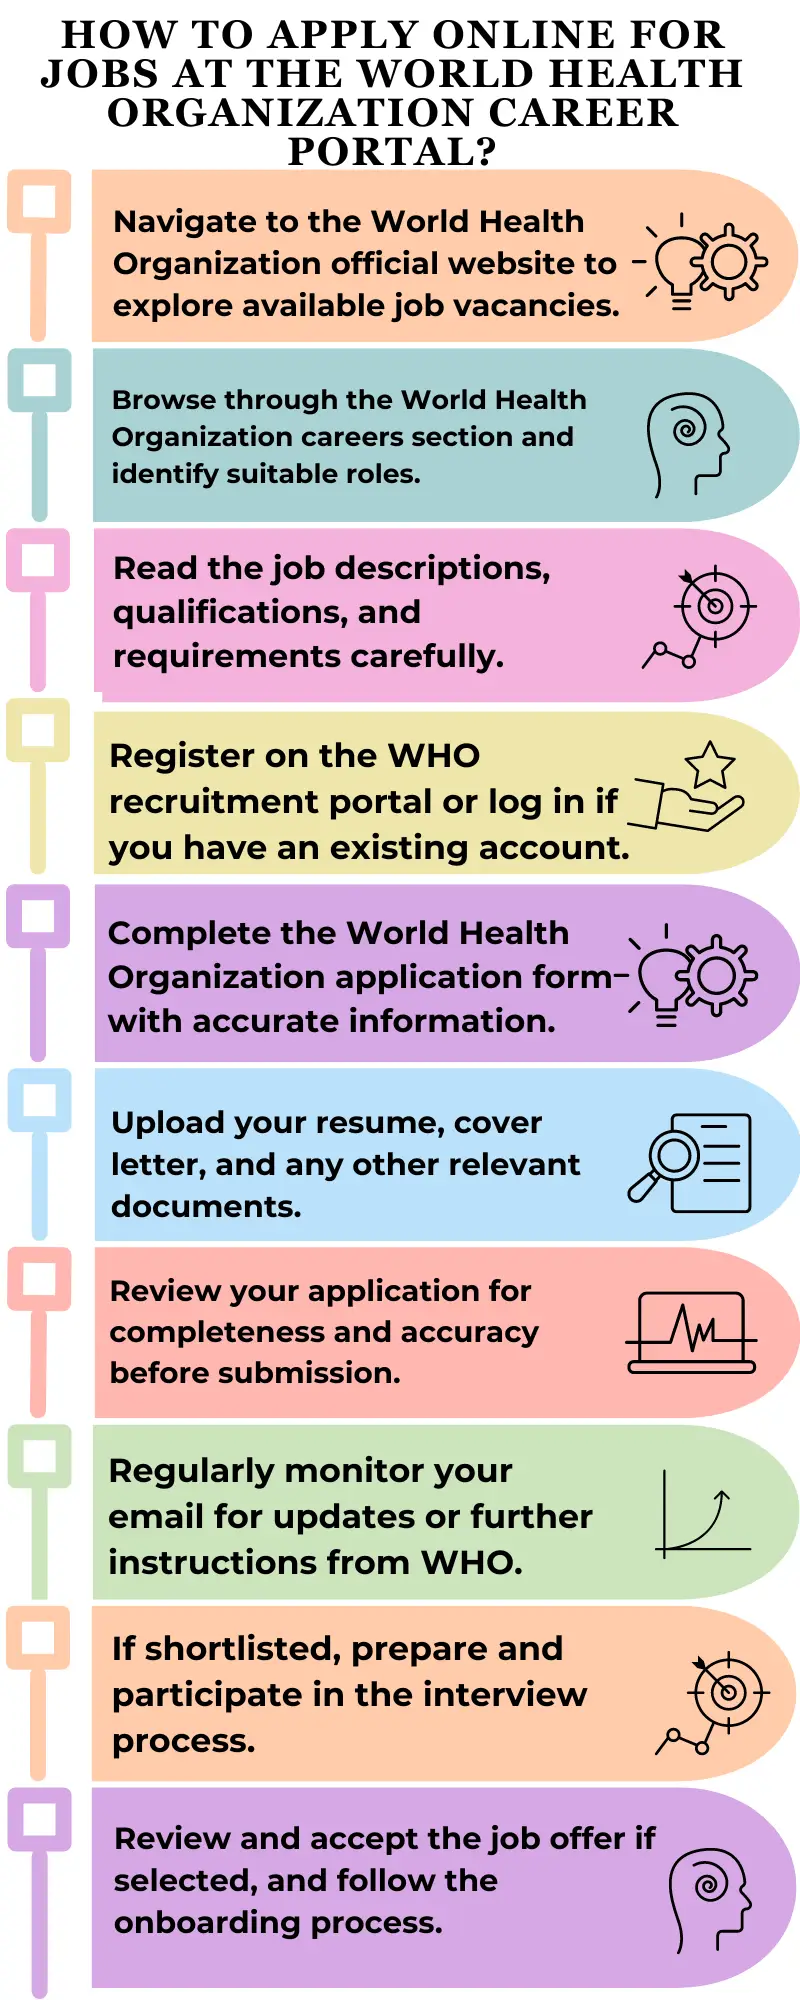 How to Apply Online for Jobs at the World Health Organization Career Portal?